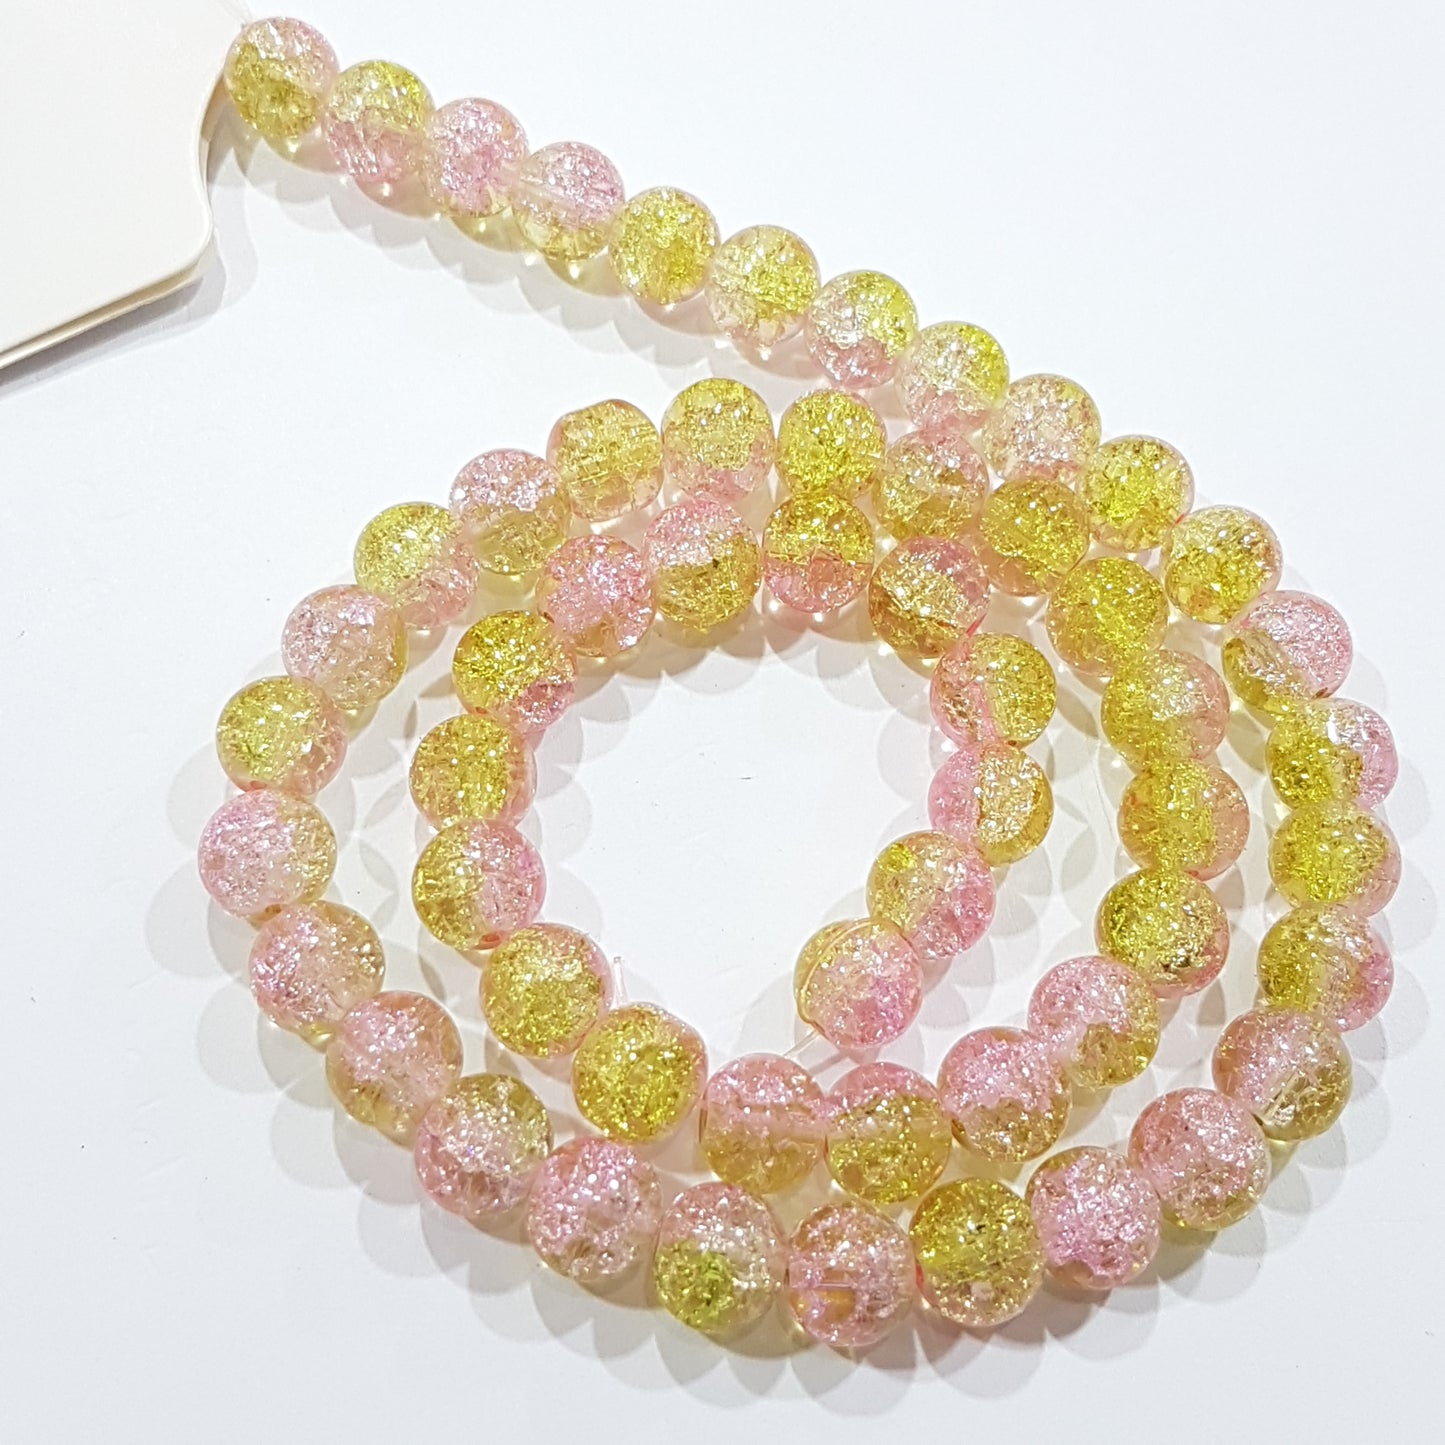 Green and Pink Crackle Glass Beads